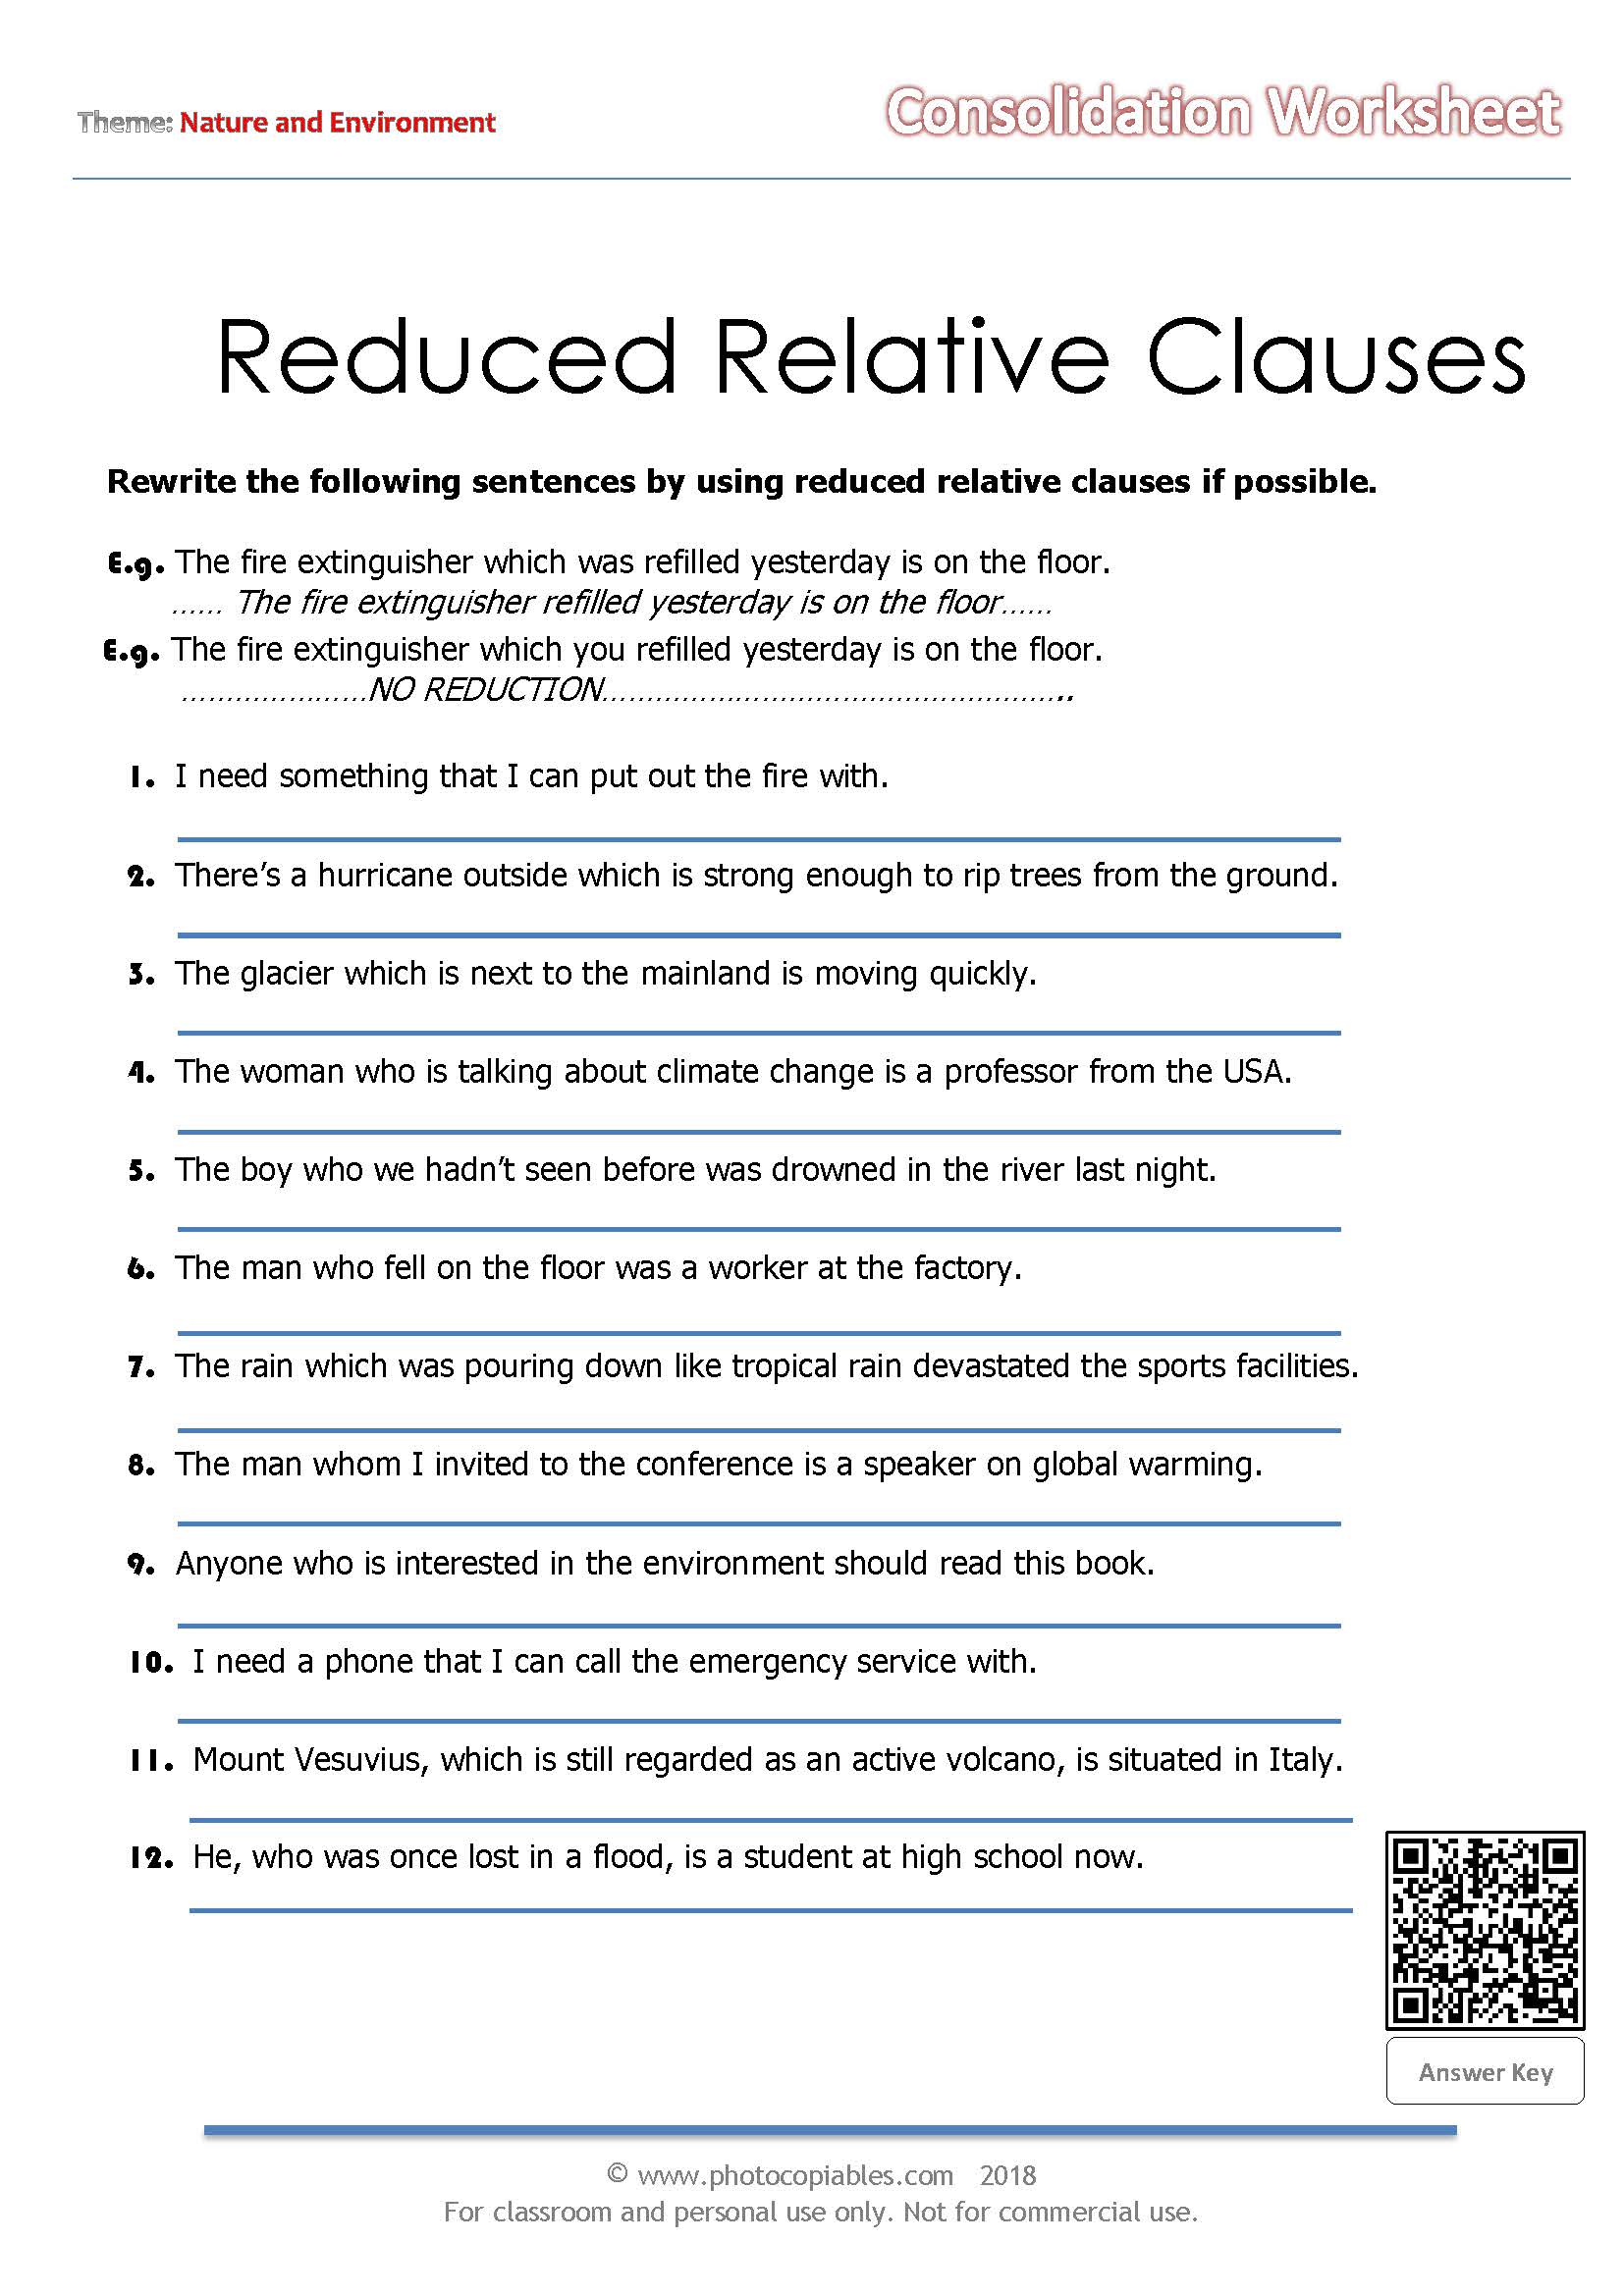 reduced-relative-clauses-worksheet-photocopiables